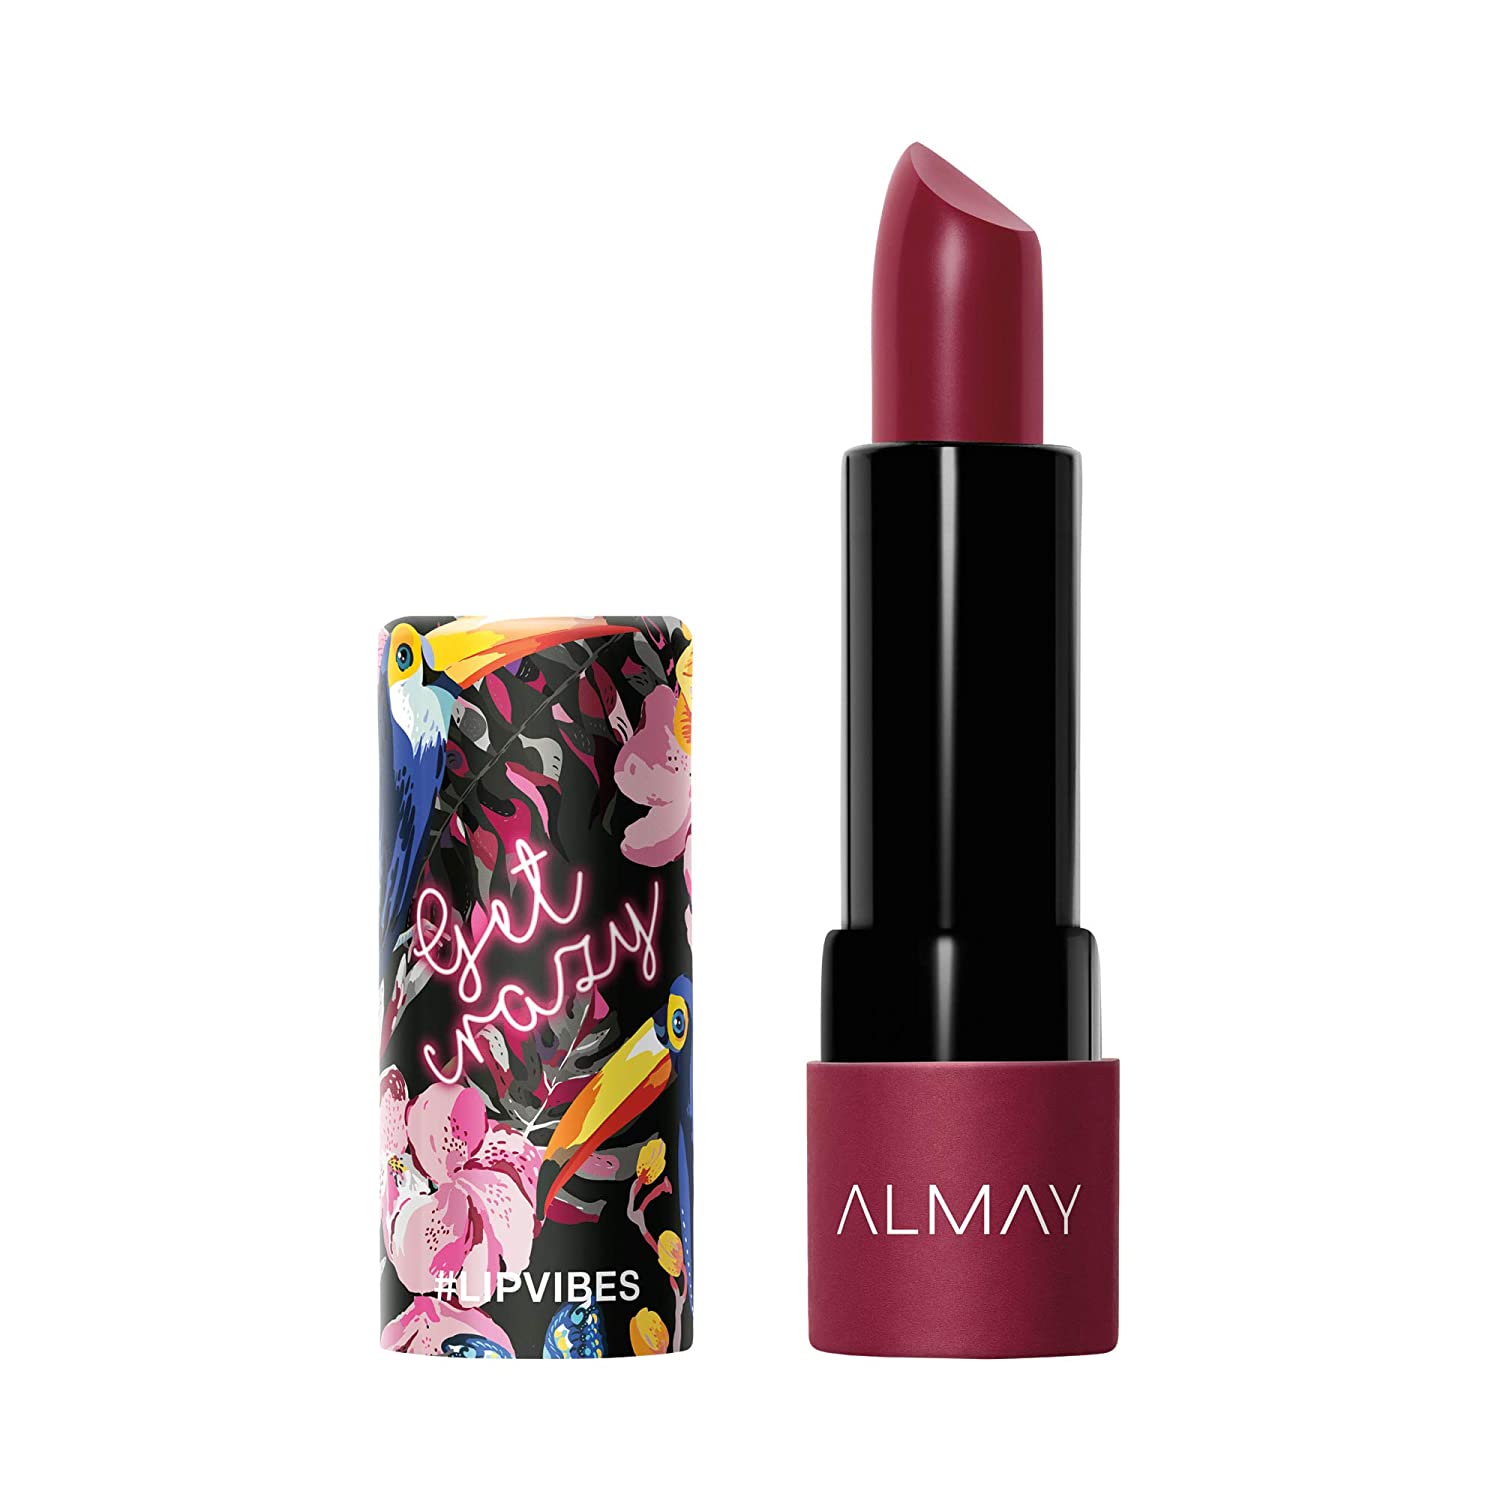 Almay Lip Vibes Lipstick (Get Crazy) $1.70 w/ S&S + Free Shipping w/ Amazon Prime or Orders $25+